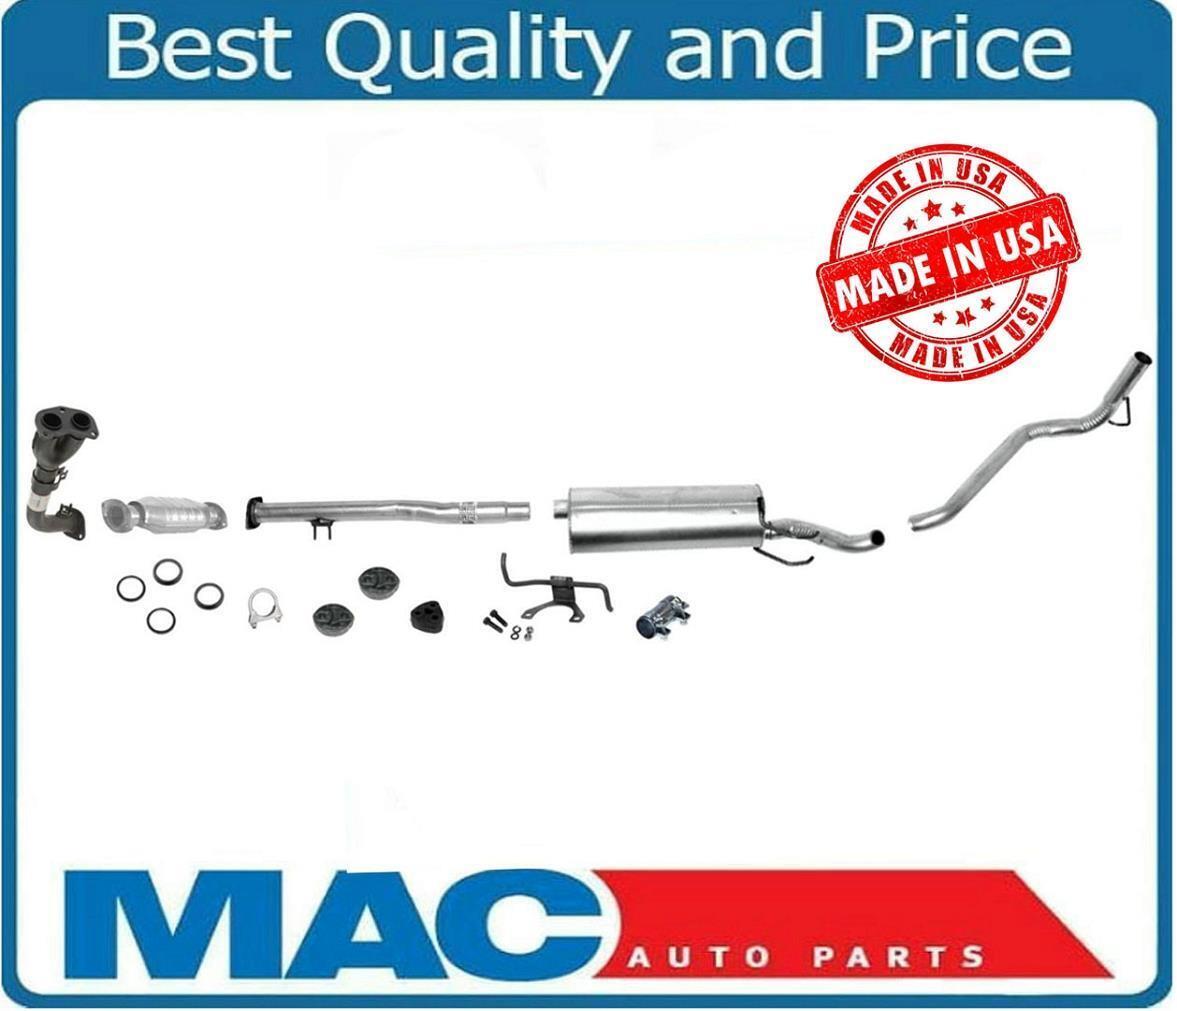 Rear Converter Middle Muffler Tail Pipe for Toyota Tacoma 2.7L Regular Cab 95-99